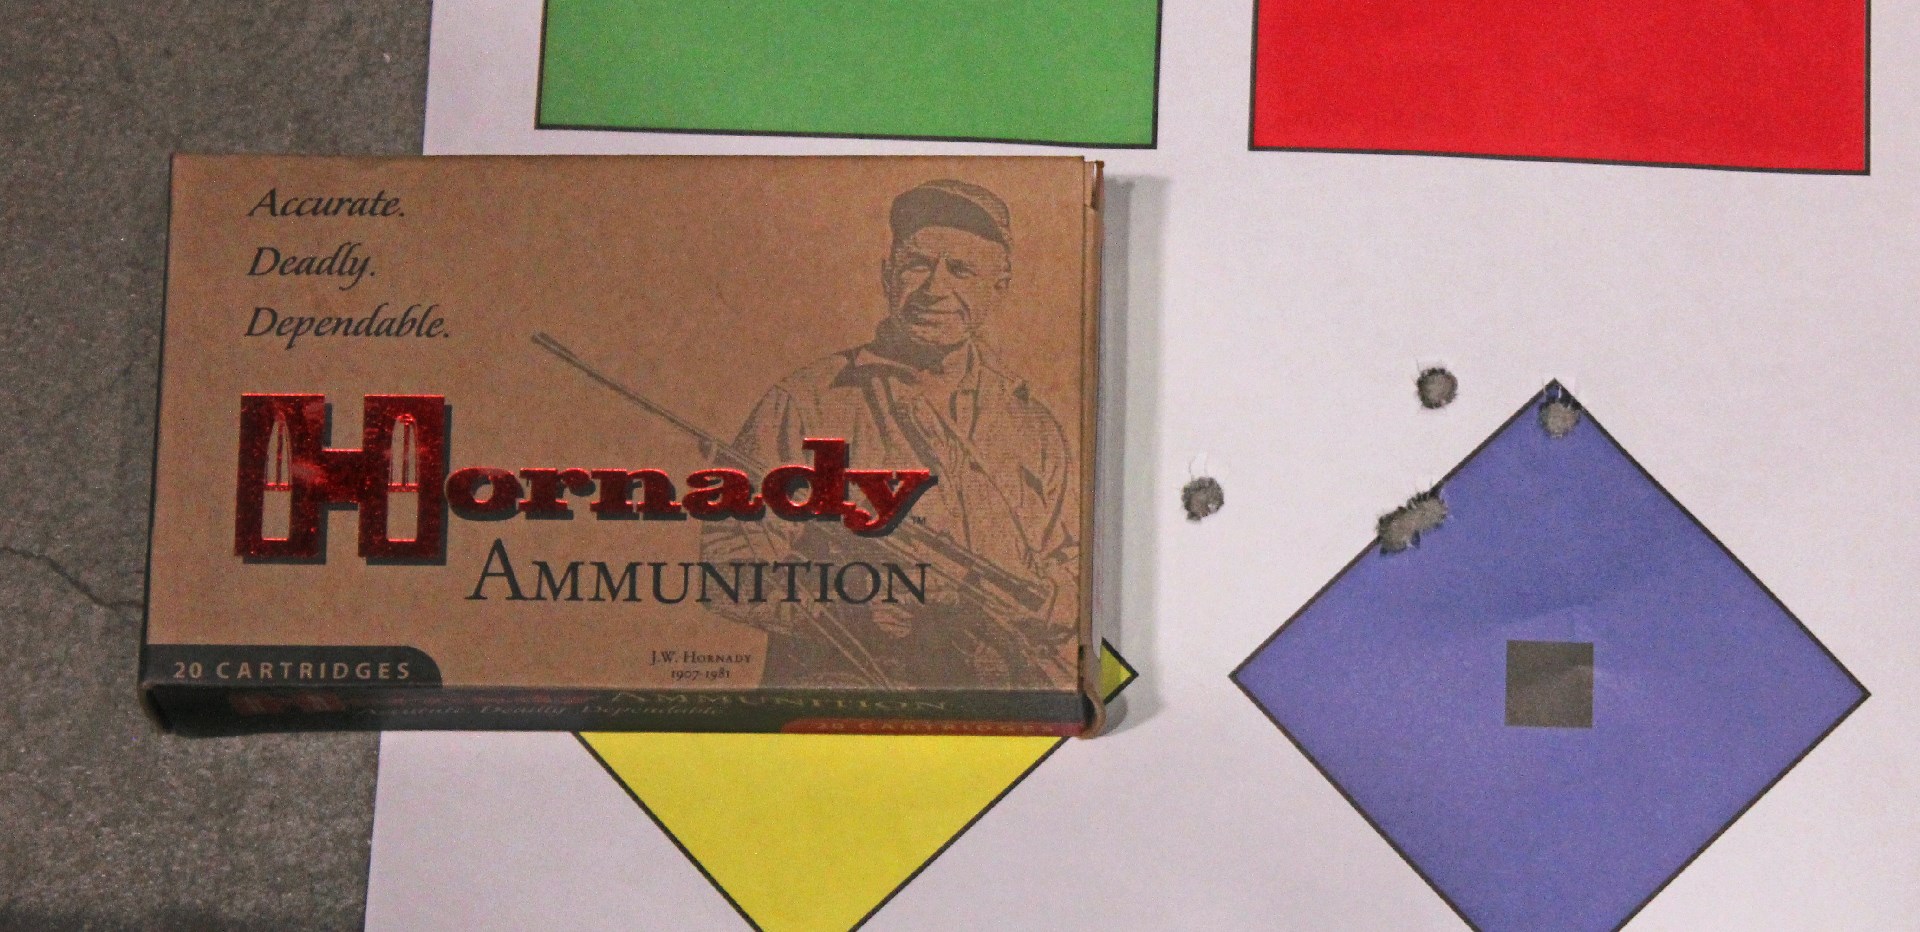 Hornady ammunition box shown with colorful target and bullet holes accuracy group